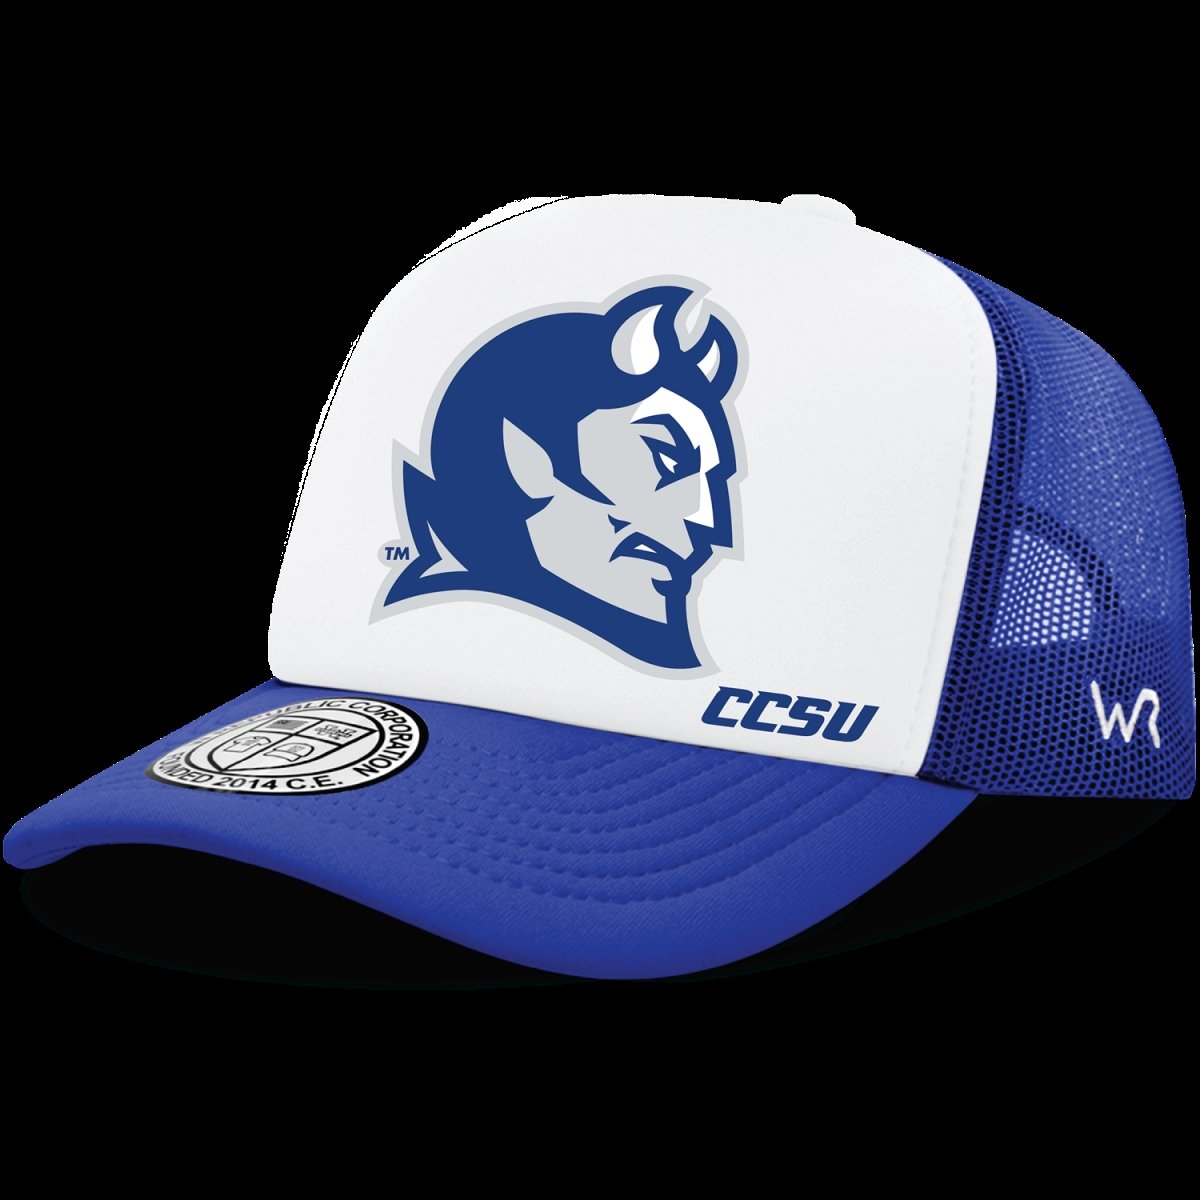 NCAA CCSU Central Connecticut State University Blue Devils Fitted Caps Hats - 6 7/8